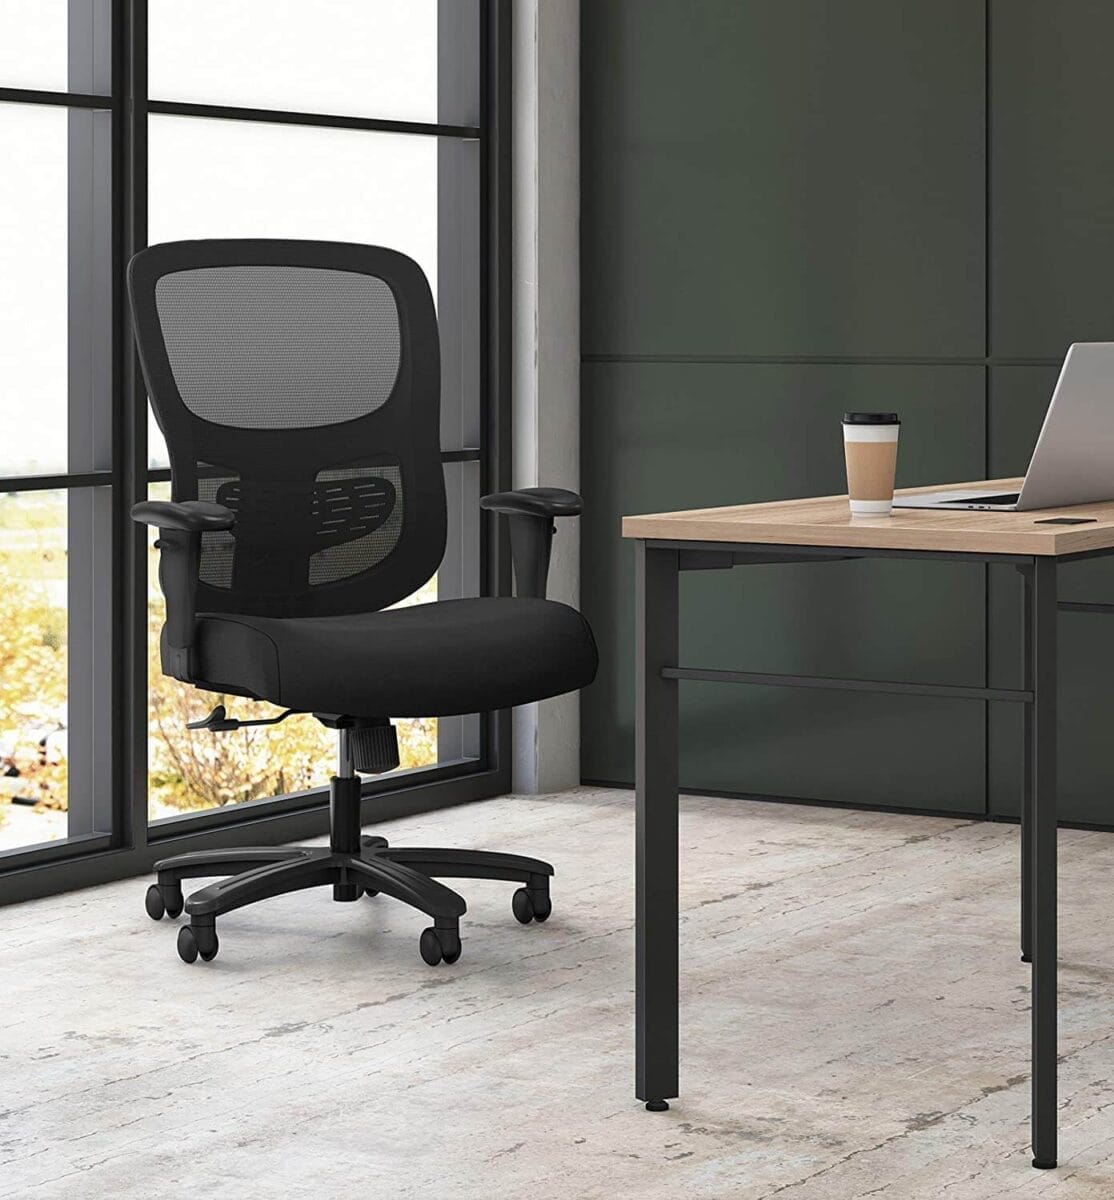 Comfortable Mesh Home Office Ergonomic Chair by Sadie (Lifestyle)